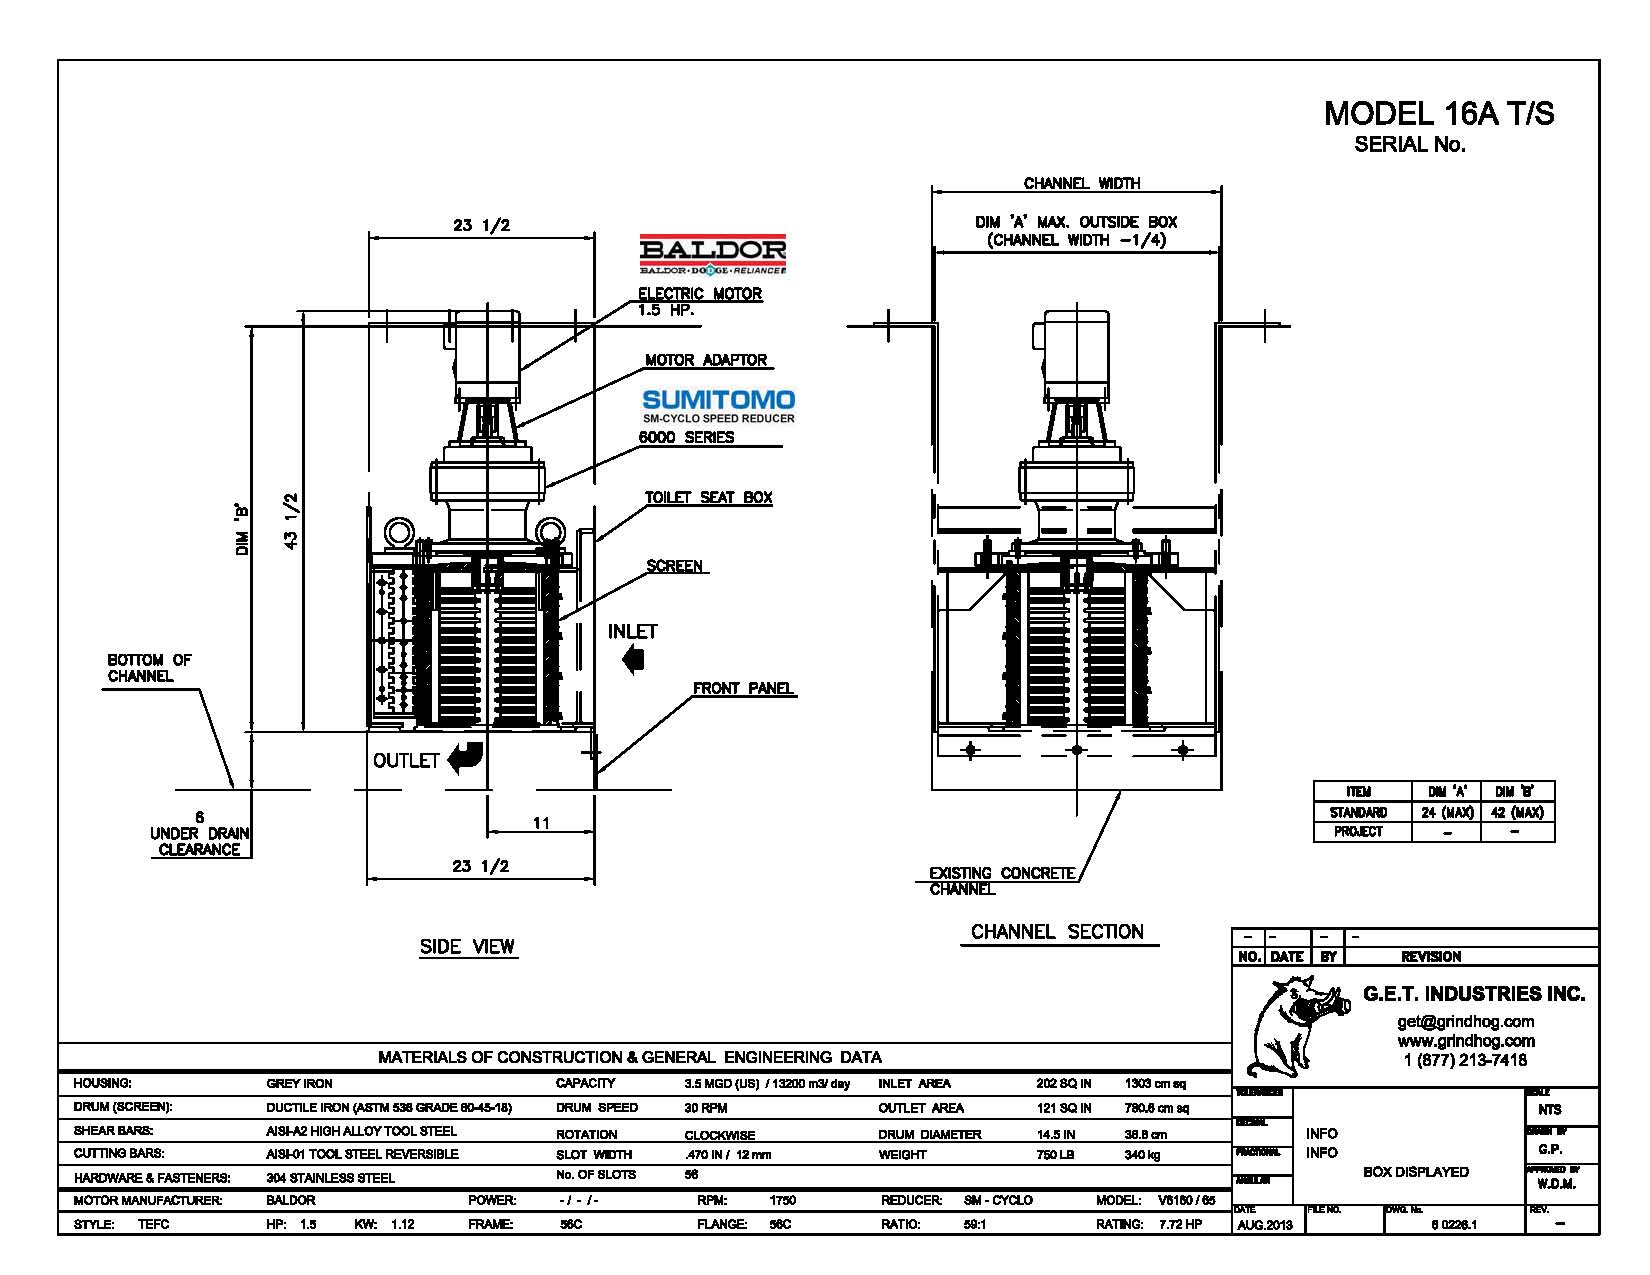 data drawing for Model 16A T/S